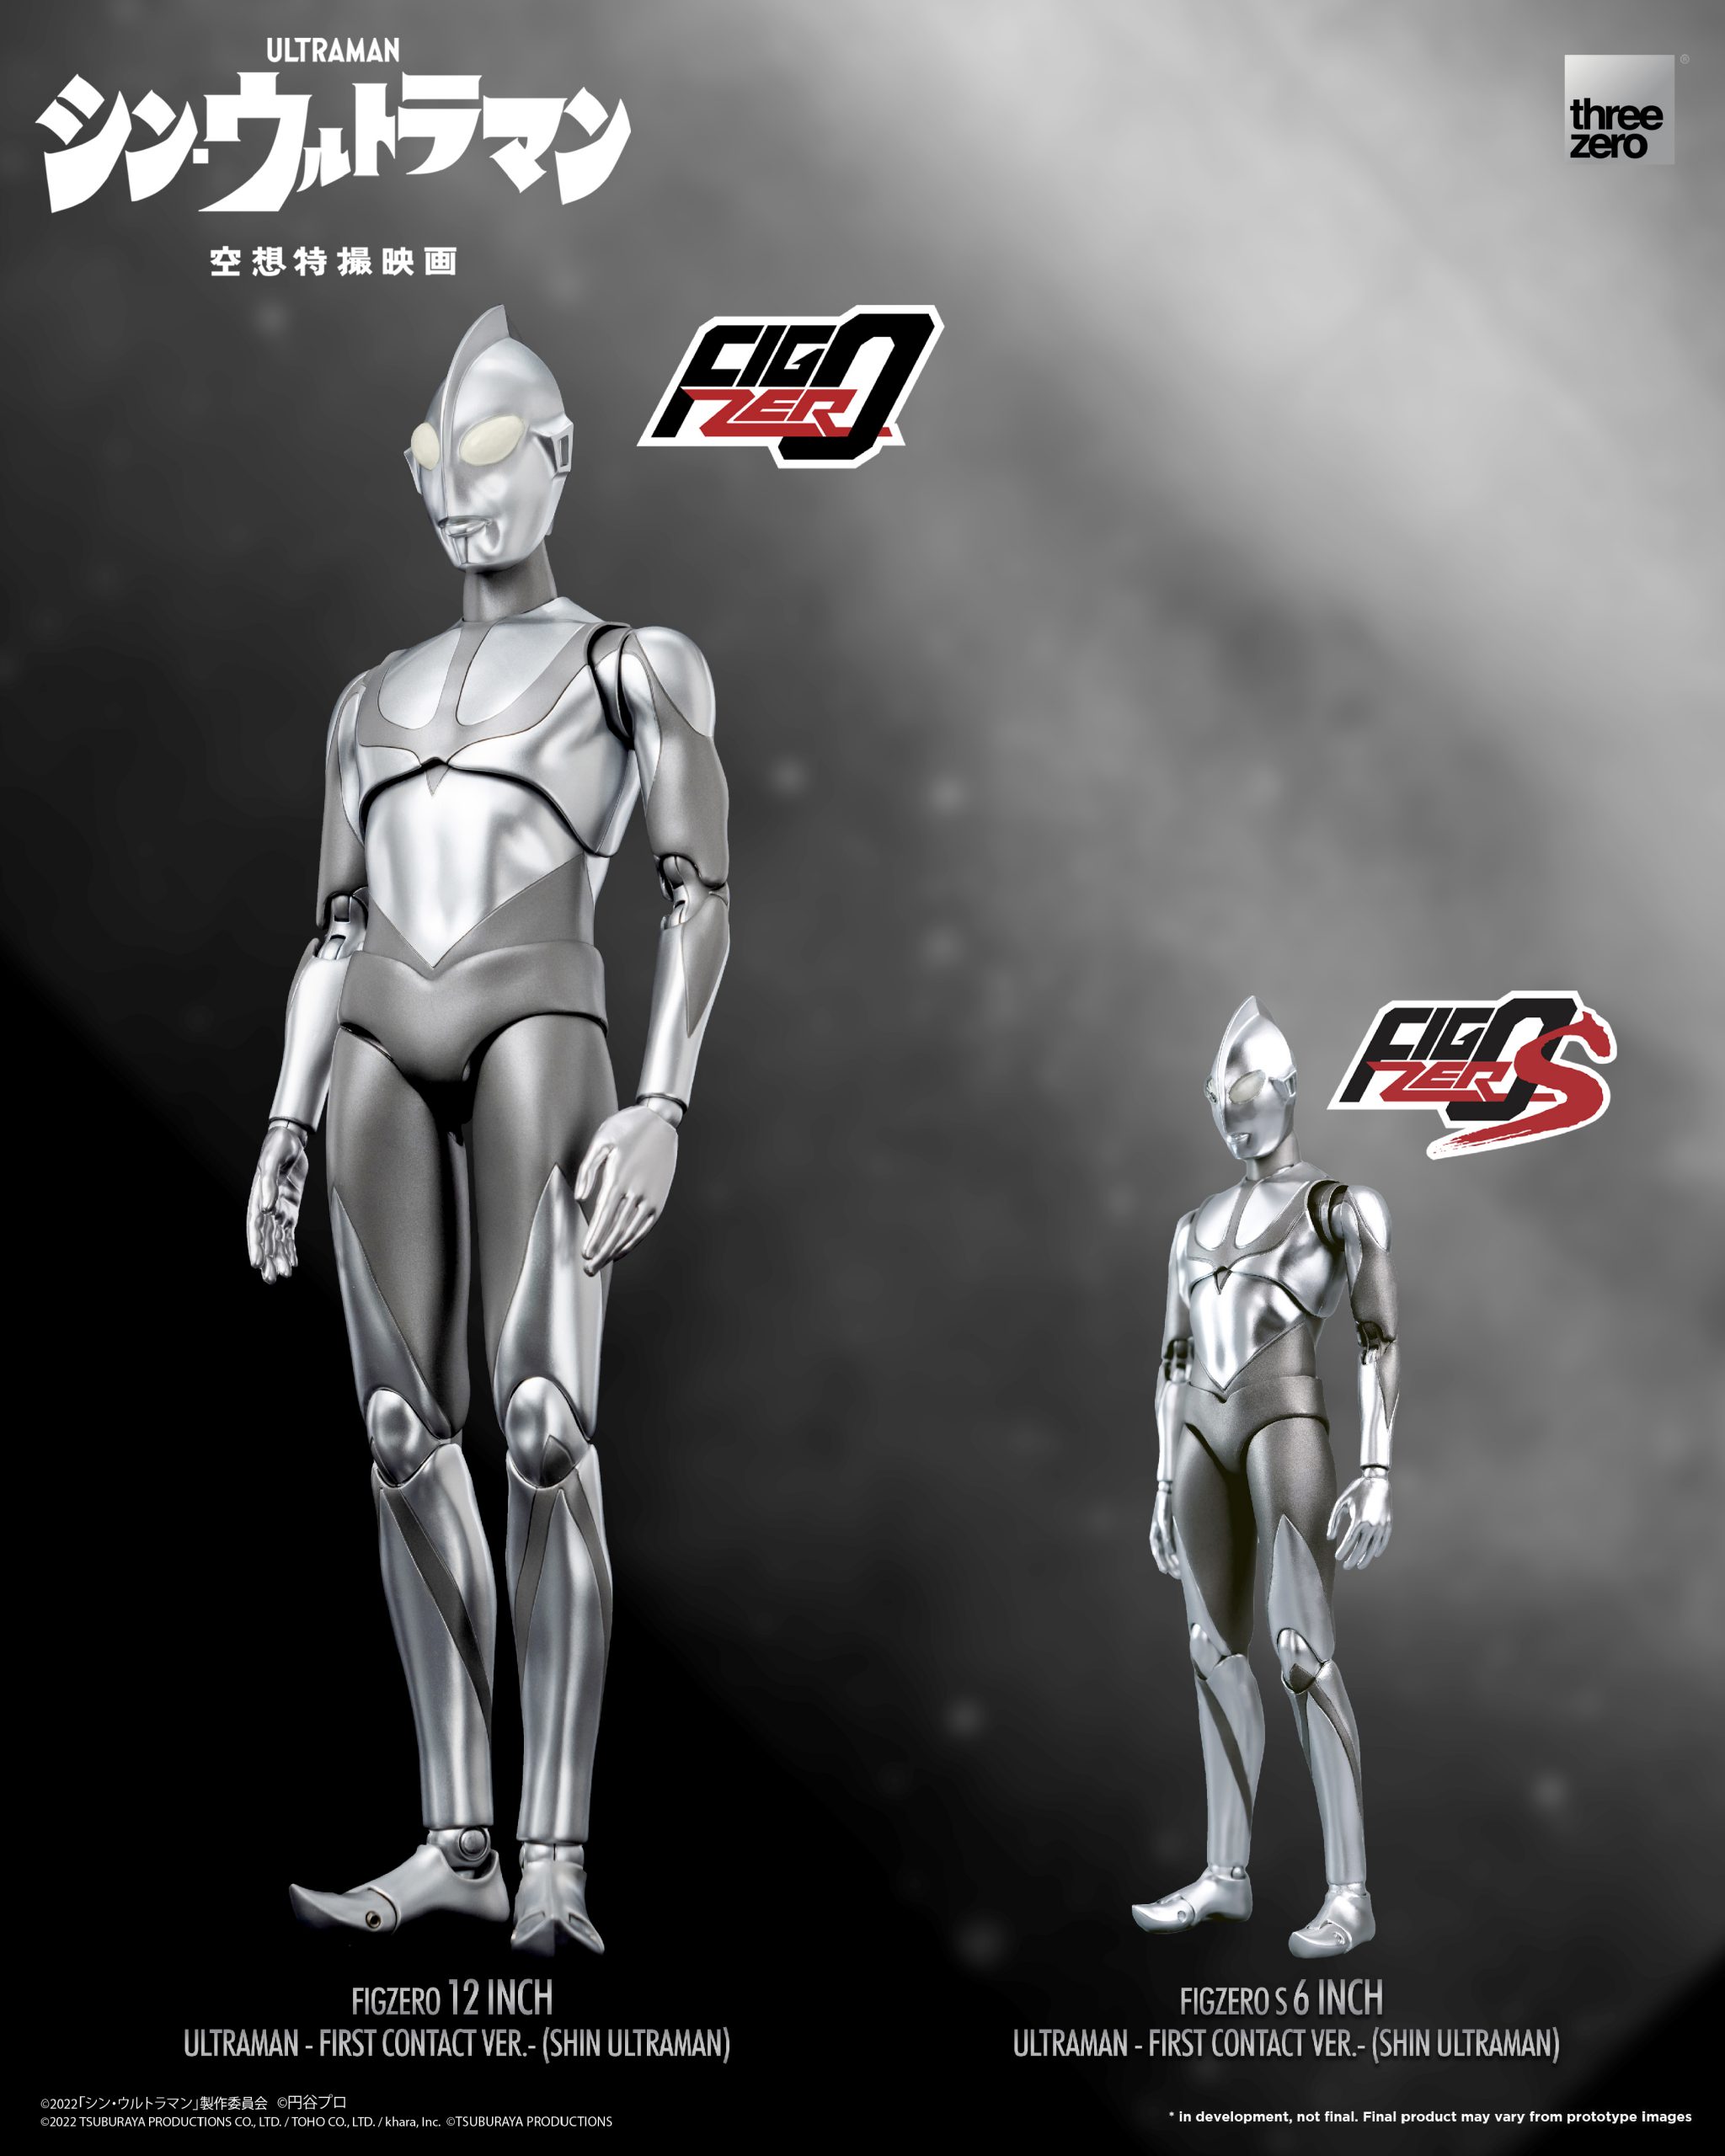 From the SHIN ULTRAMAN live-action film, both FigZero S 6 inch